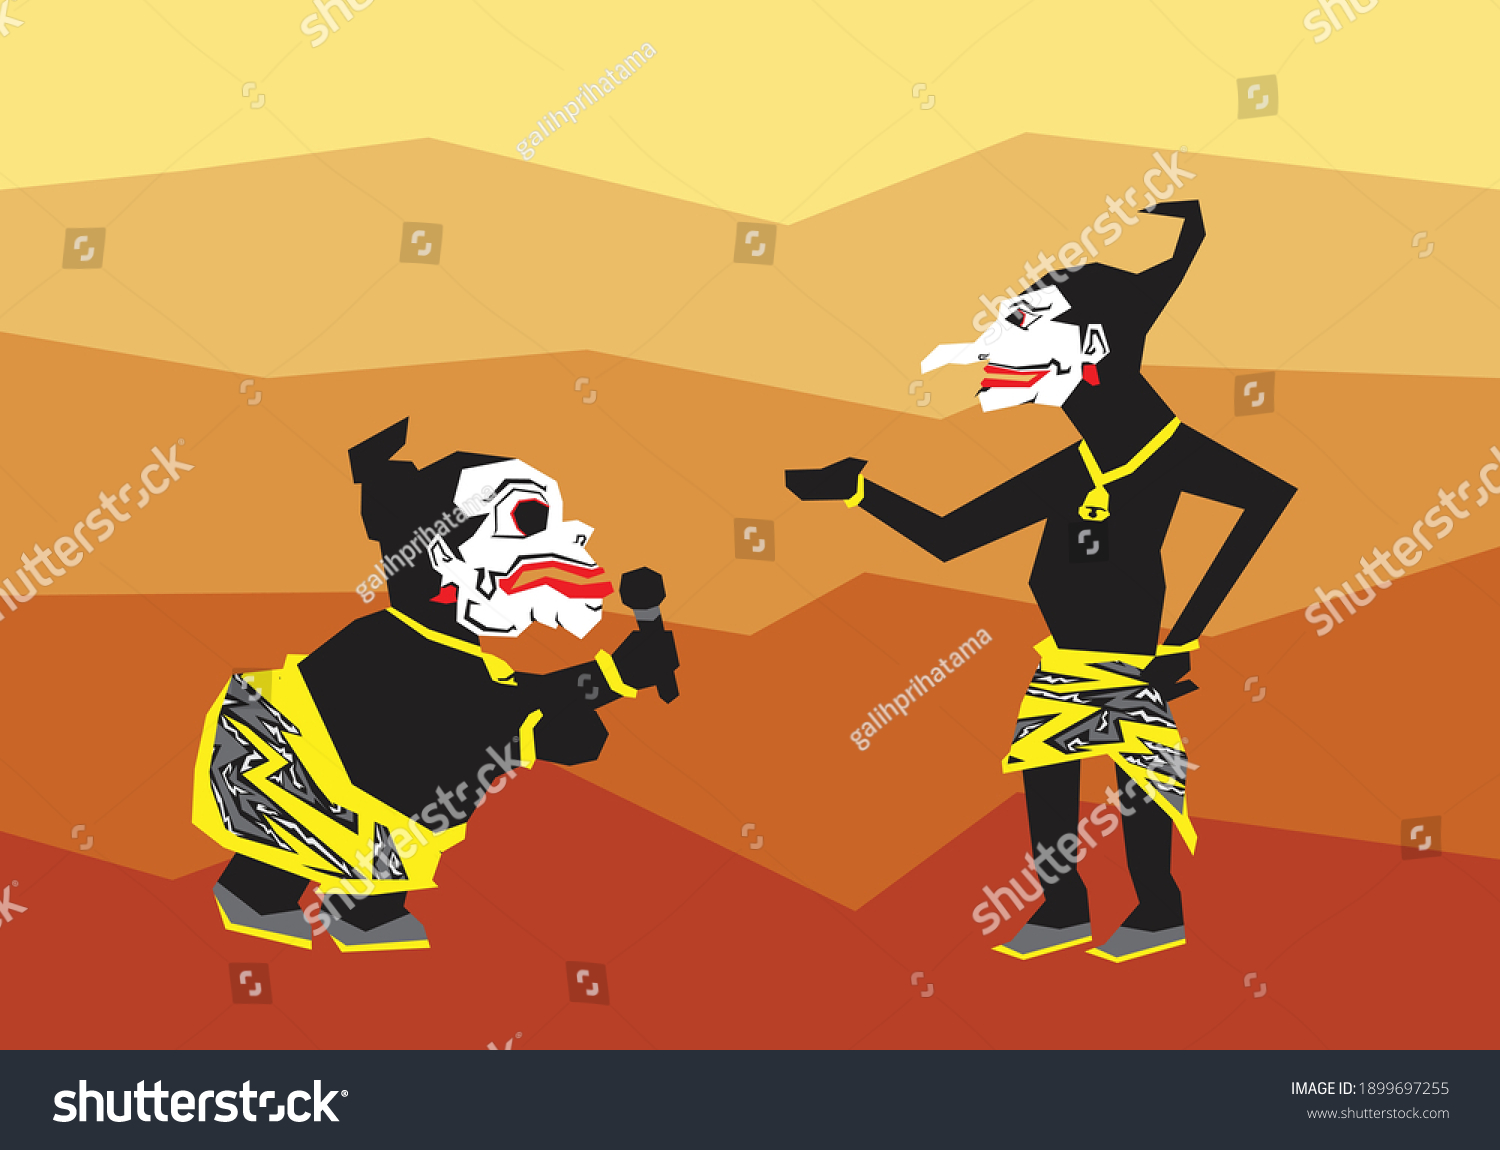 SVG of An illustration of member from Punakawan, Bagong and Petruk talking to each other. Punakawan figures is very well known in the world of Wayang, one of Indonesia's unique traditions. svg